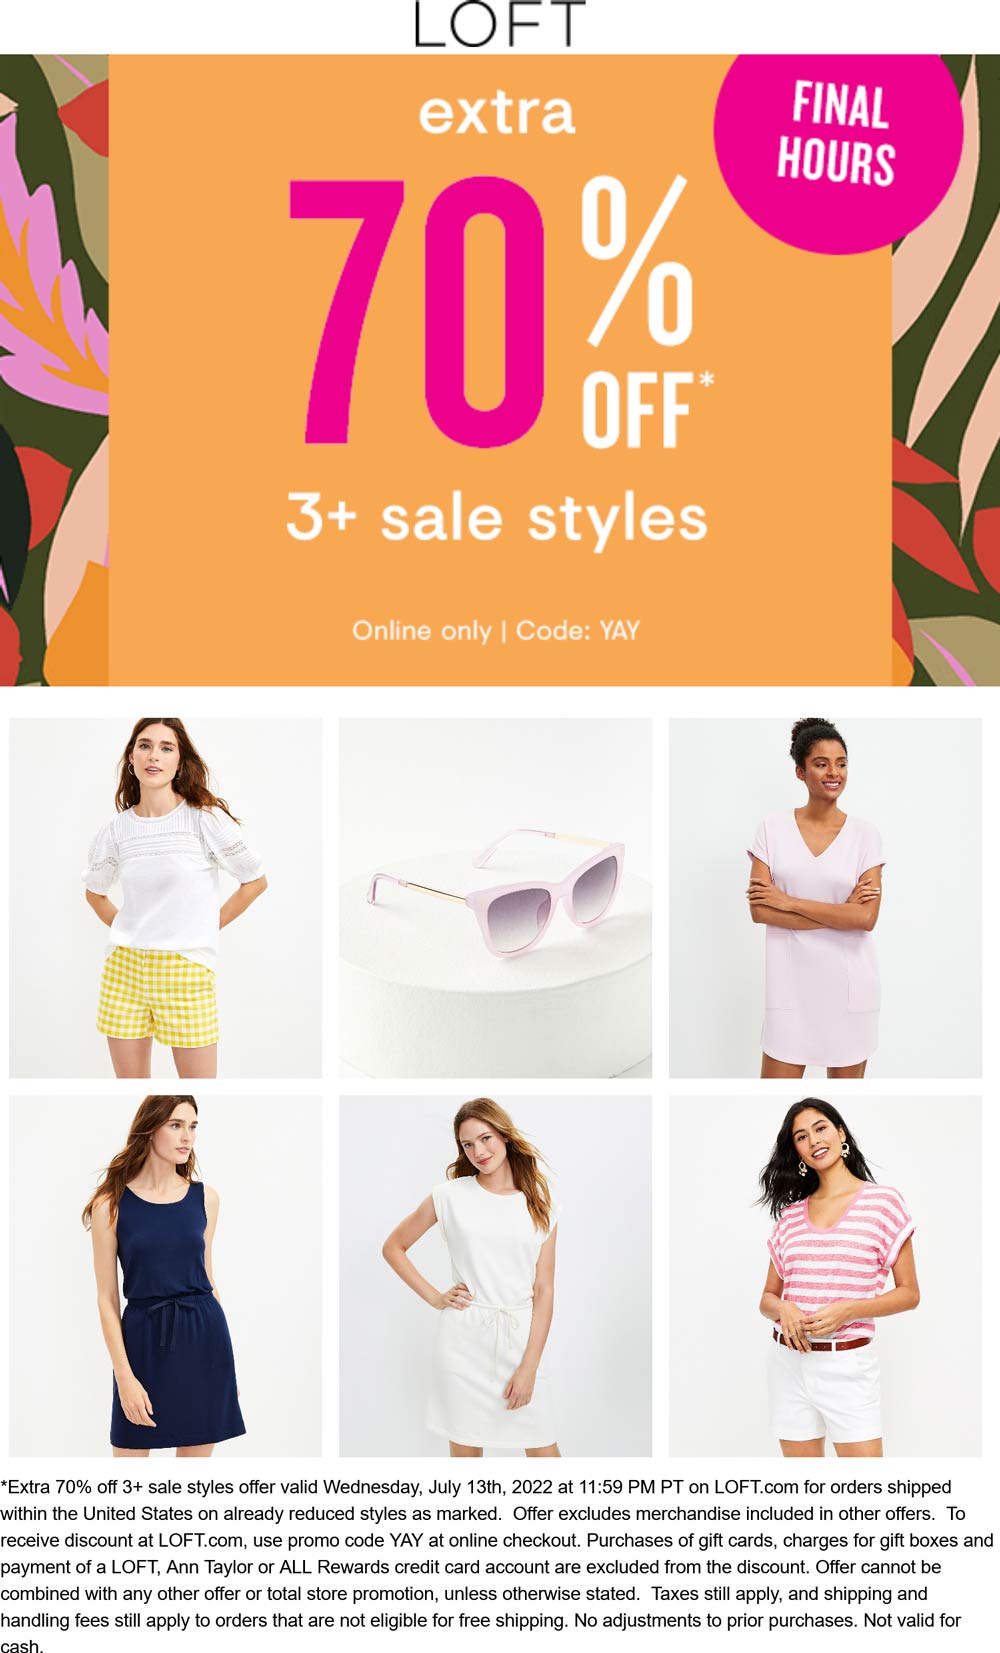 LOFT stores Coupon  Extra 70% off 3+ styles online today at LOFT via promo code YAY #loft 